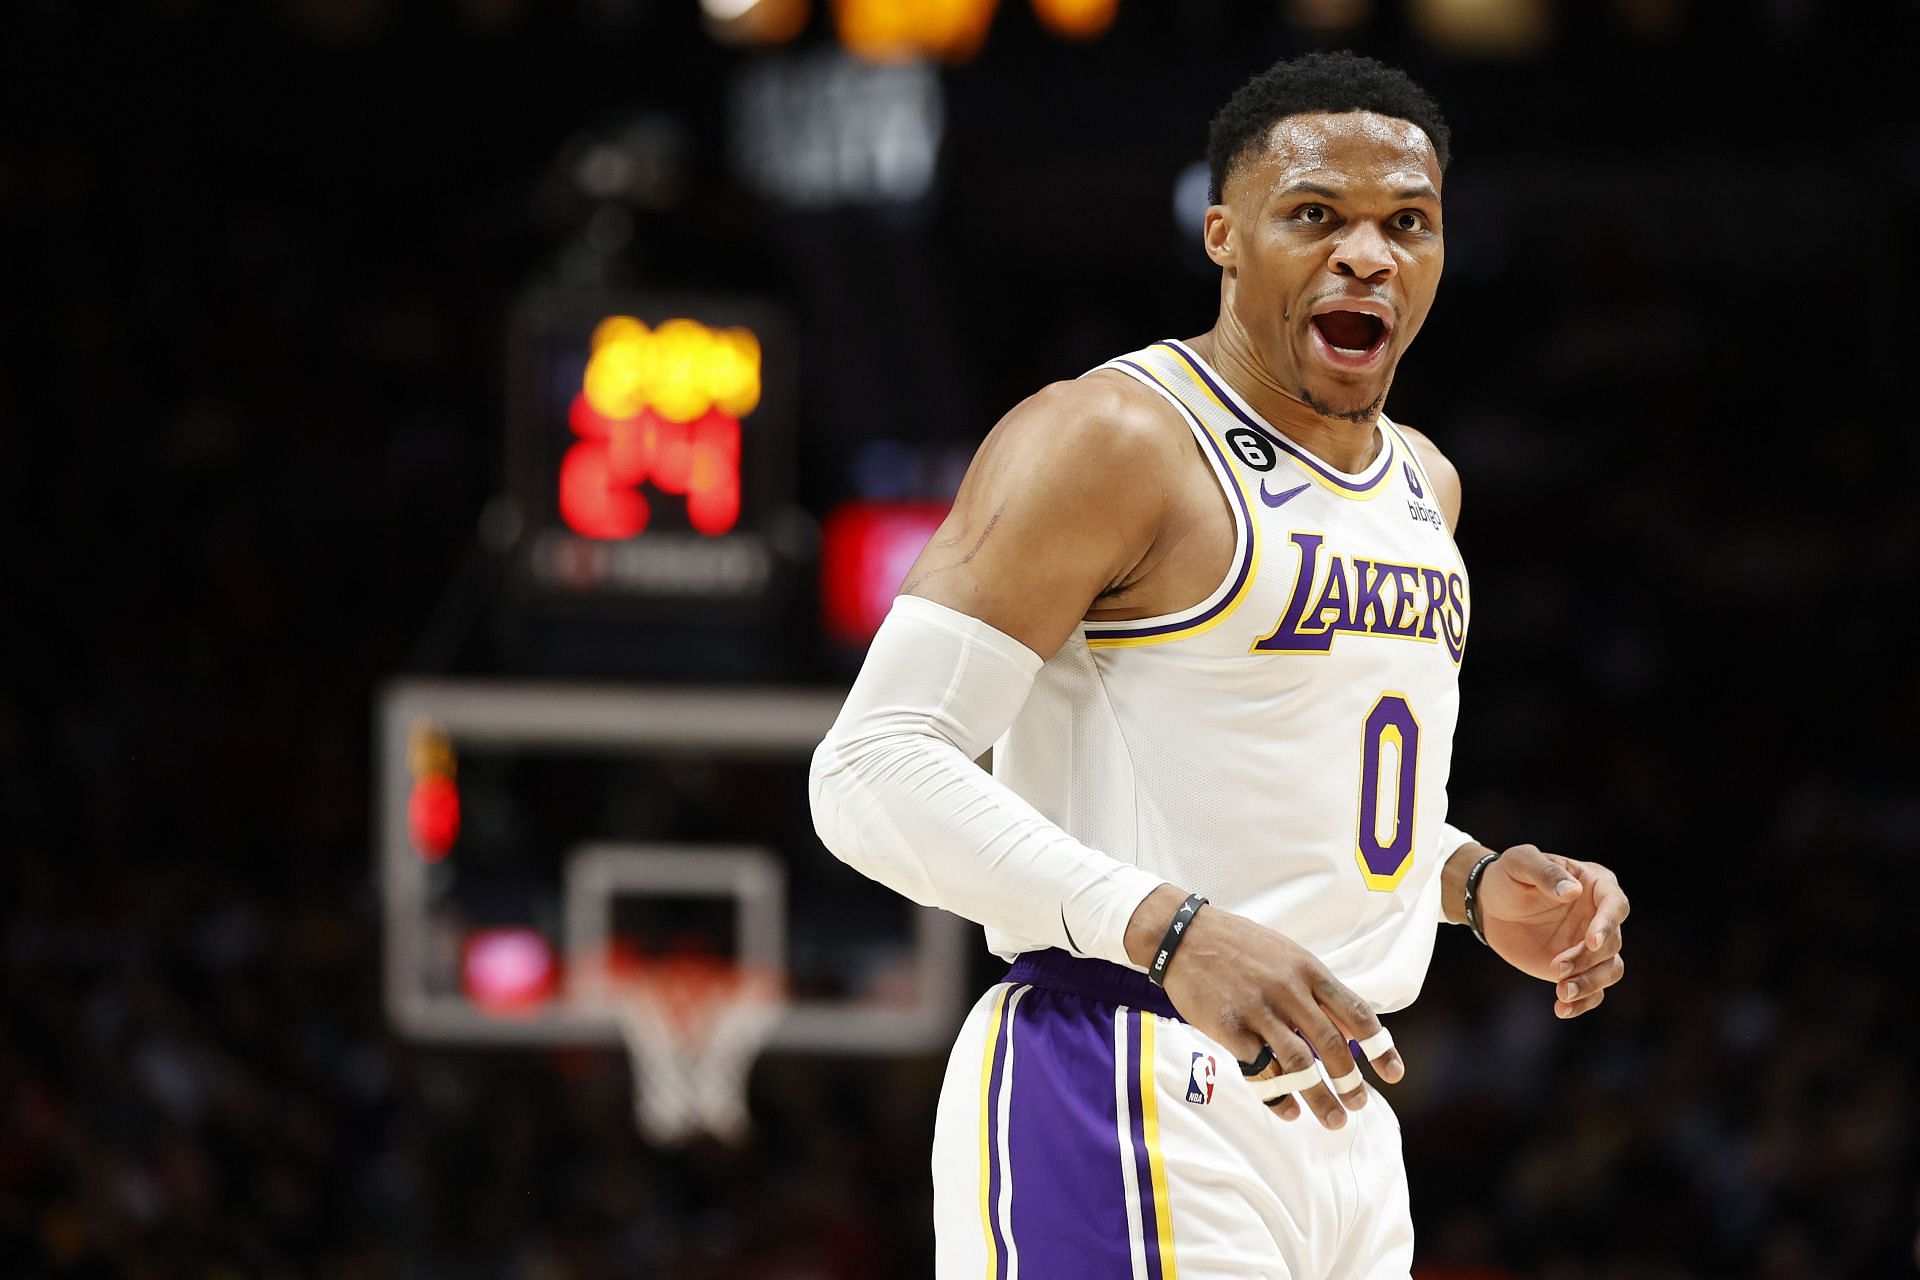 The Lakers could improve the team before the trade deadline.